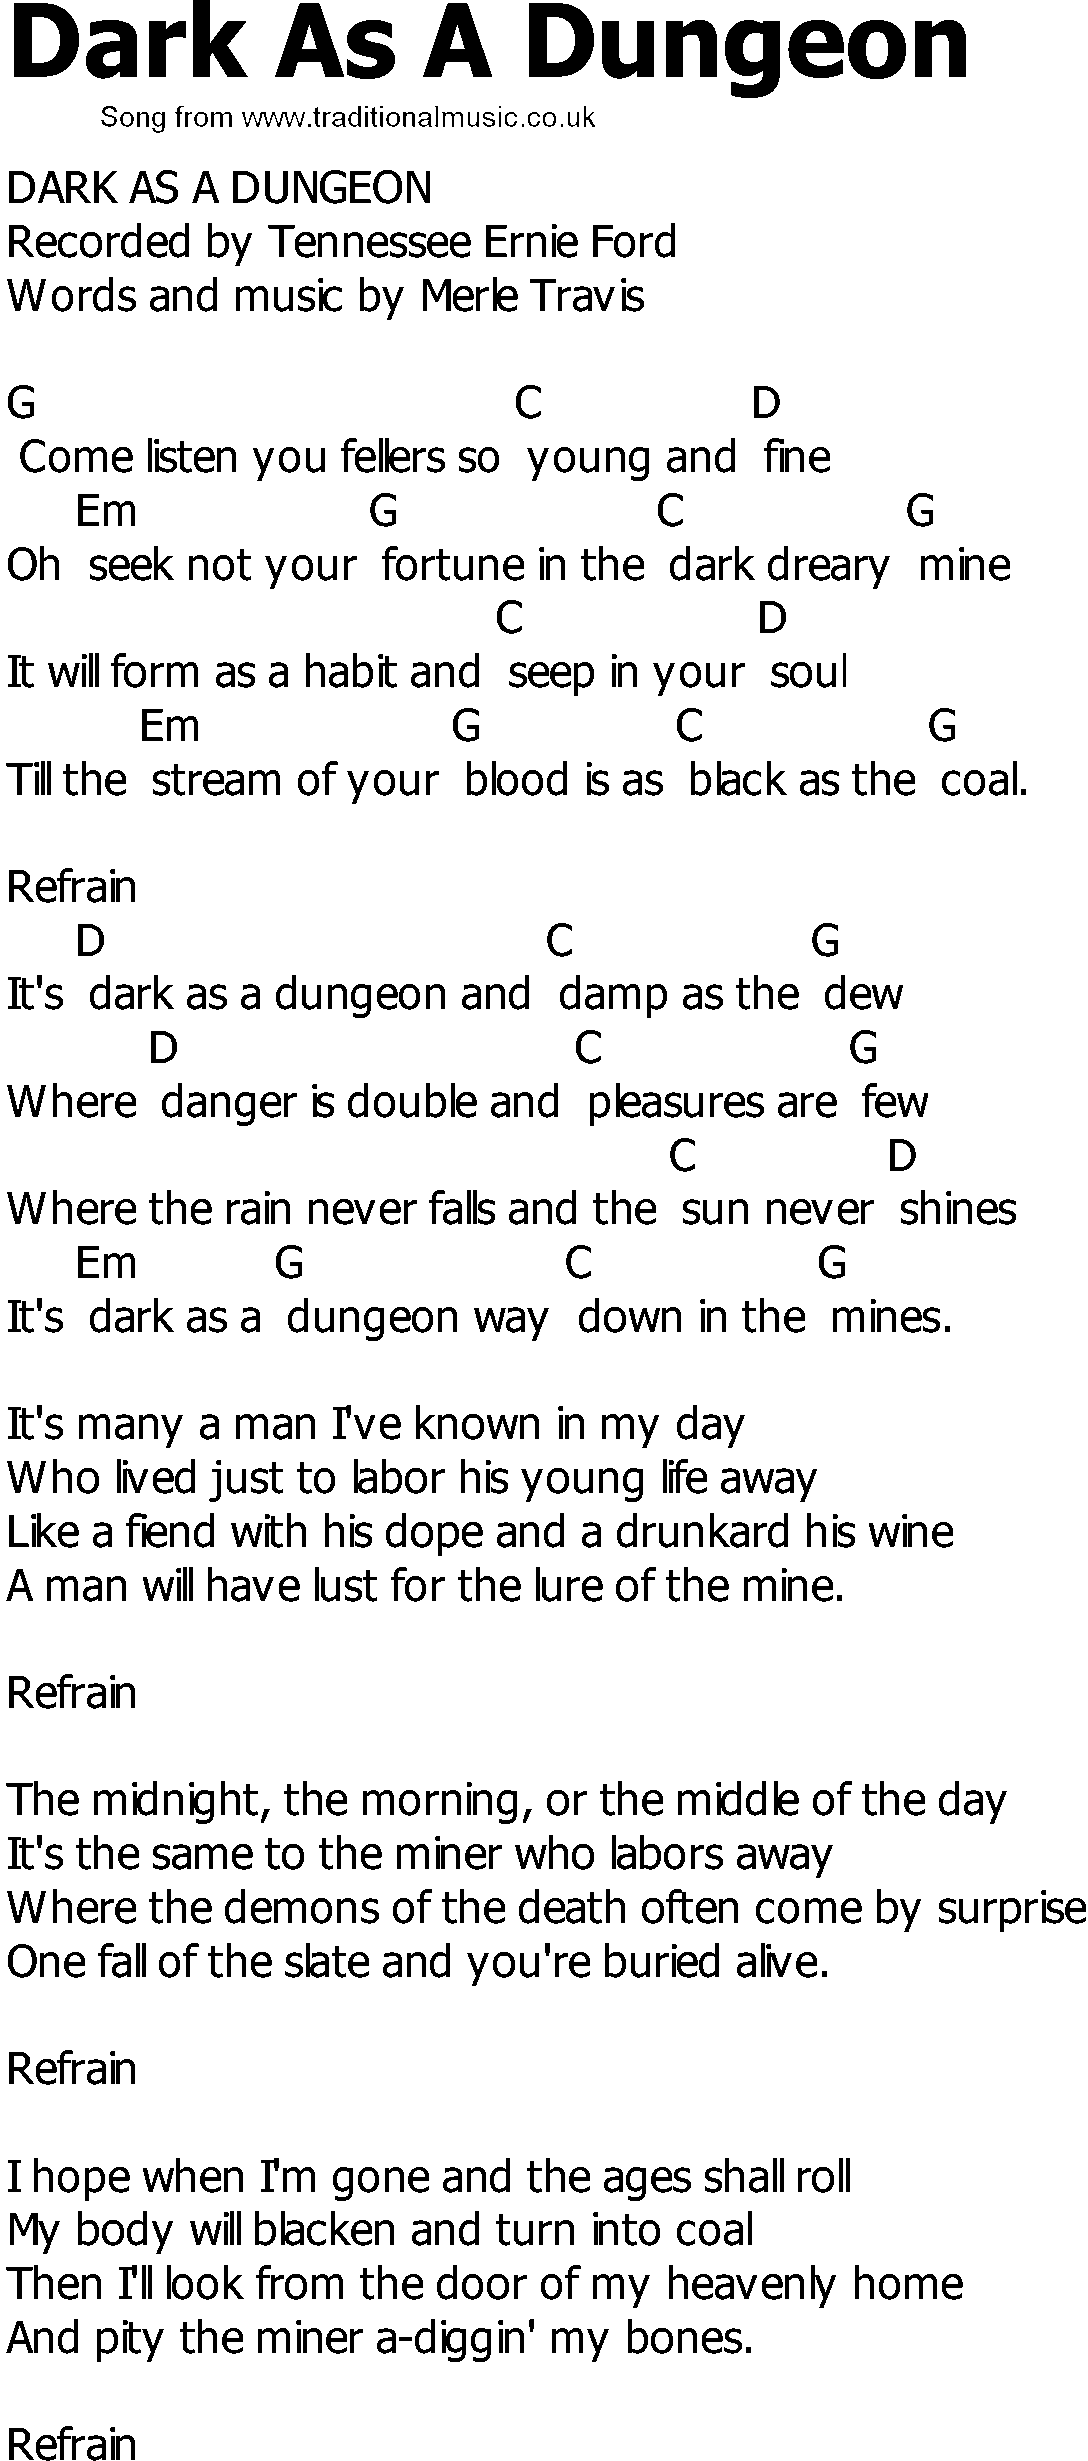 Old Country song lyrics with chords - Dark As A Dungeon